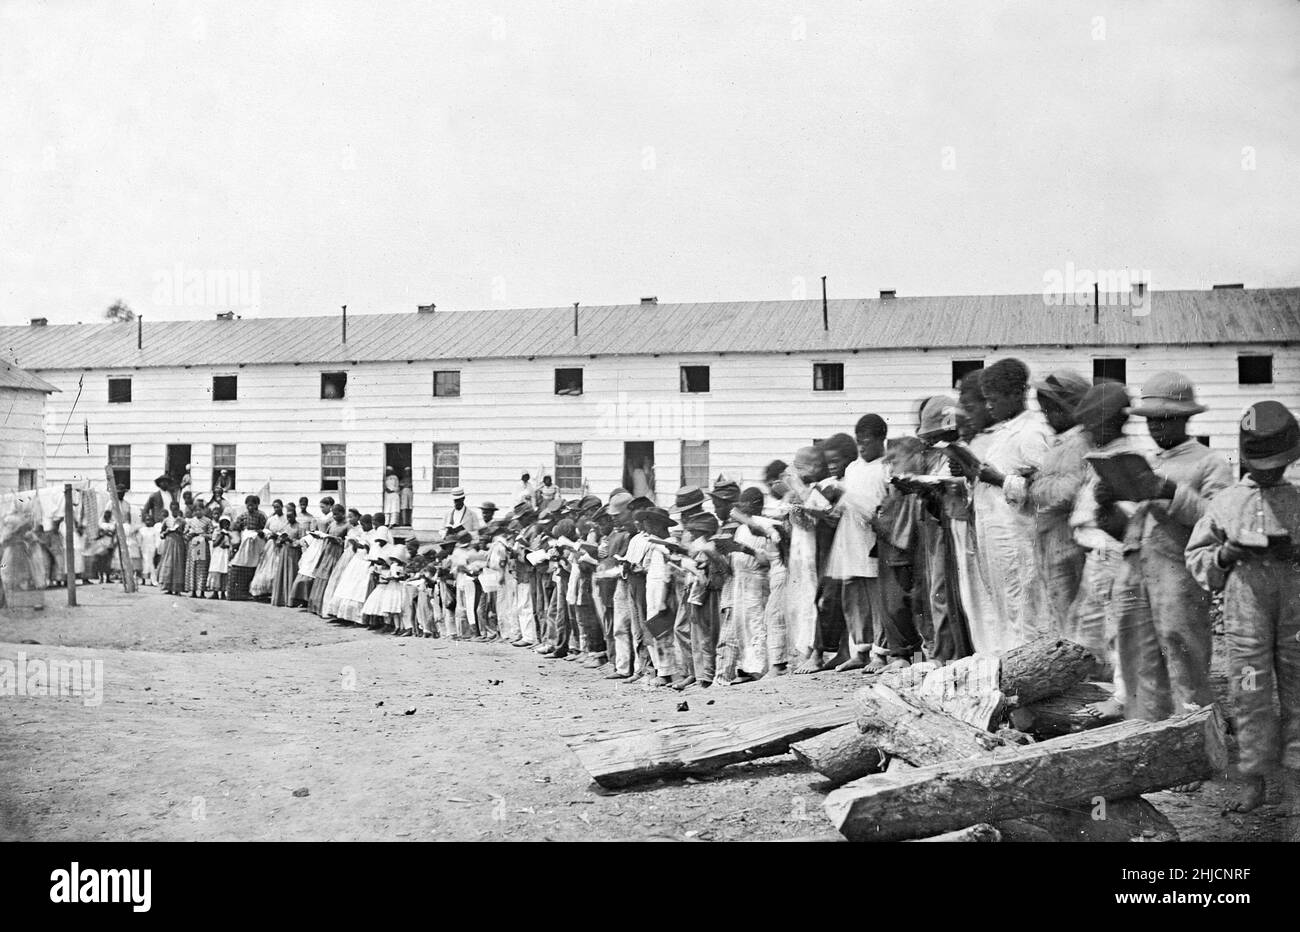 Contraband School, American Civil War era, circa 1861-65. Photo by Mathew Brady. Contraband was a term commonly used in the US military during the Civil War to describe a new status for certain escaped slaves or those who affiliated with Union forces. Stock Photo